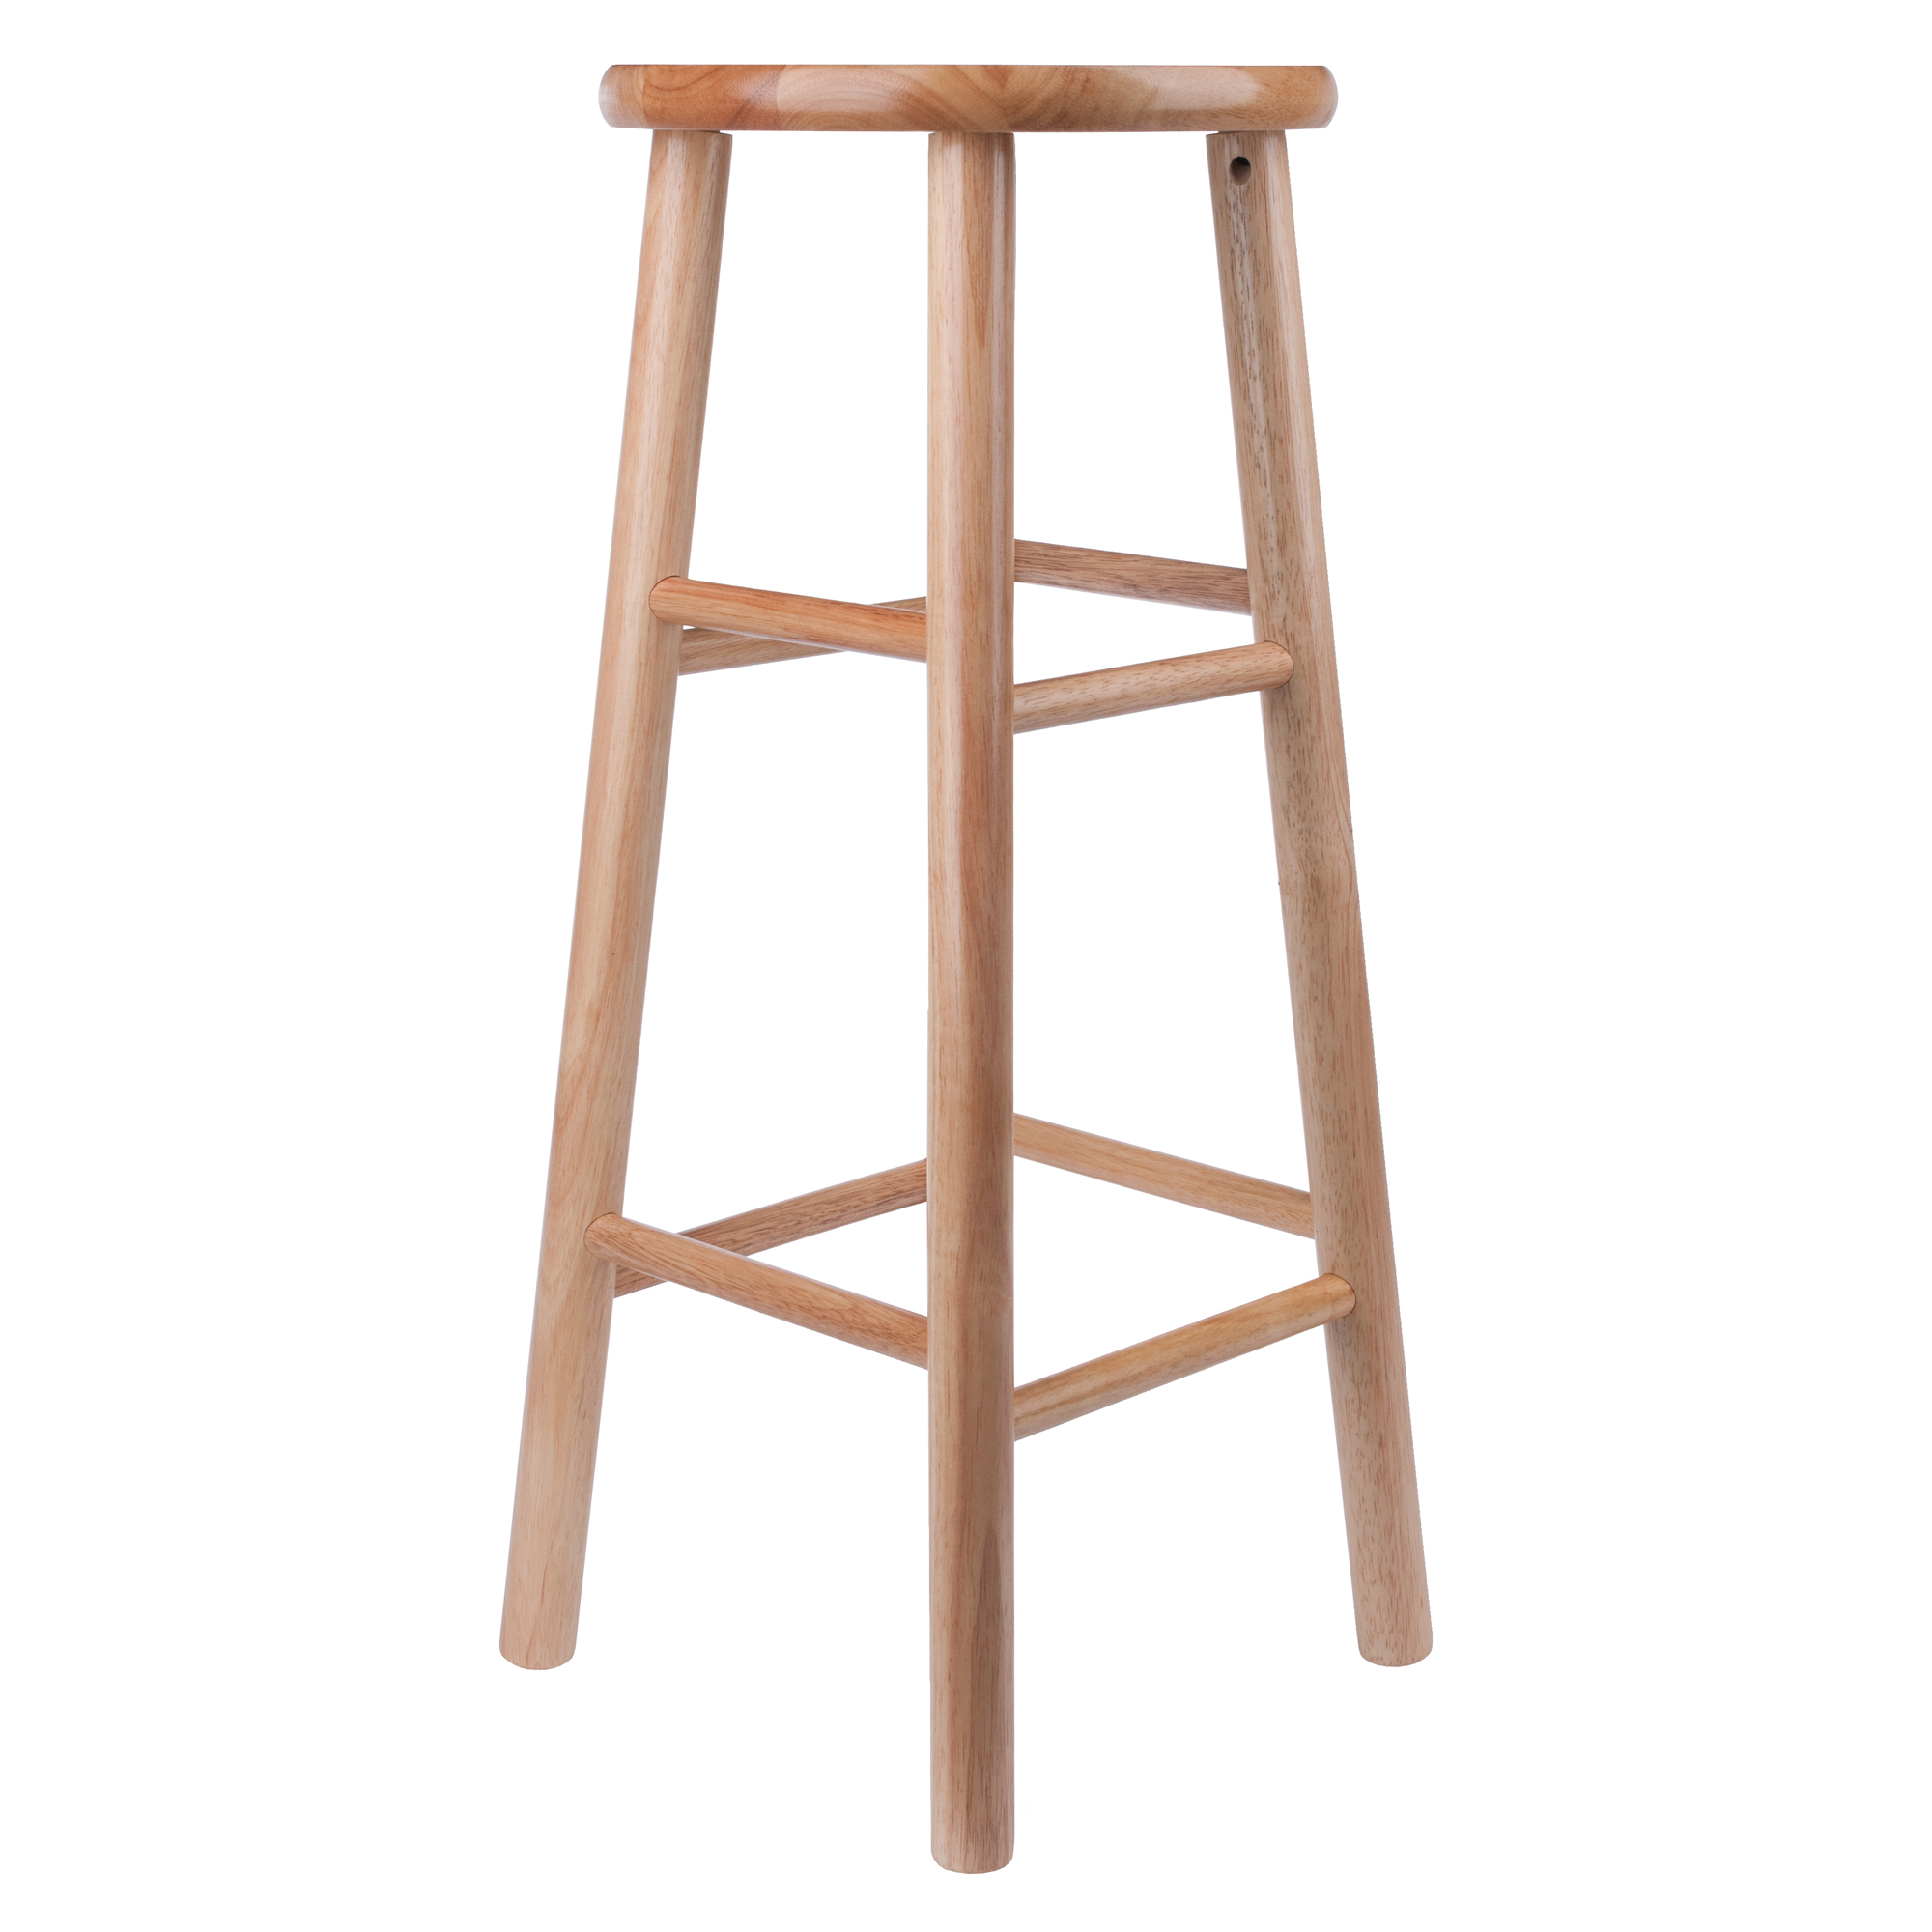 Winsome All Natural 30 in. Beveled Seat Bar Stools - Set of 2 - image 3 of 6